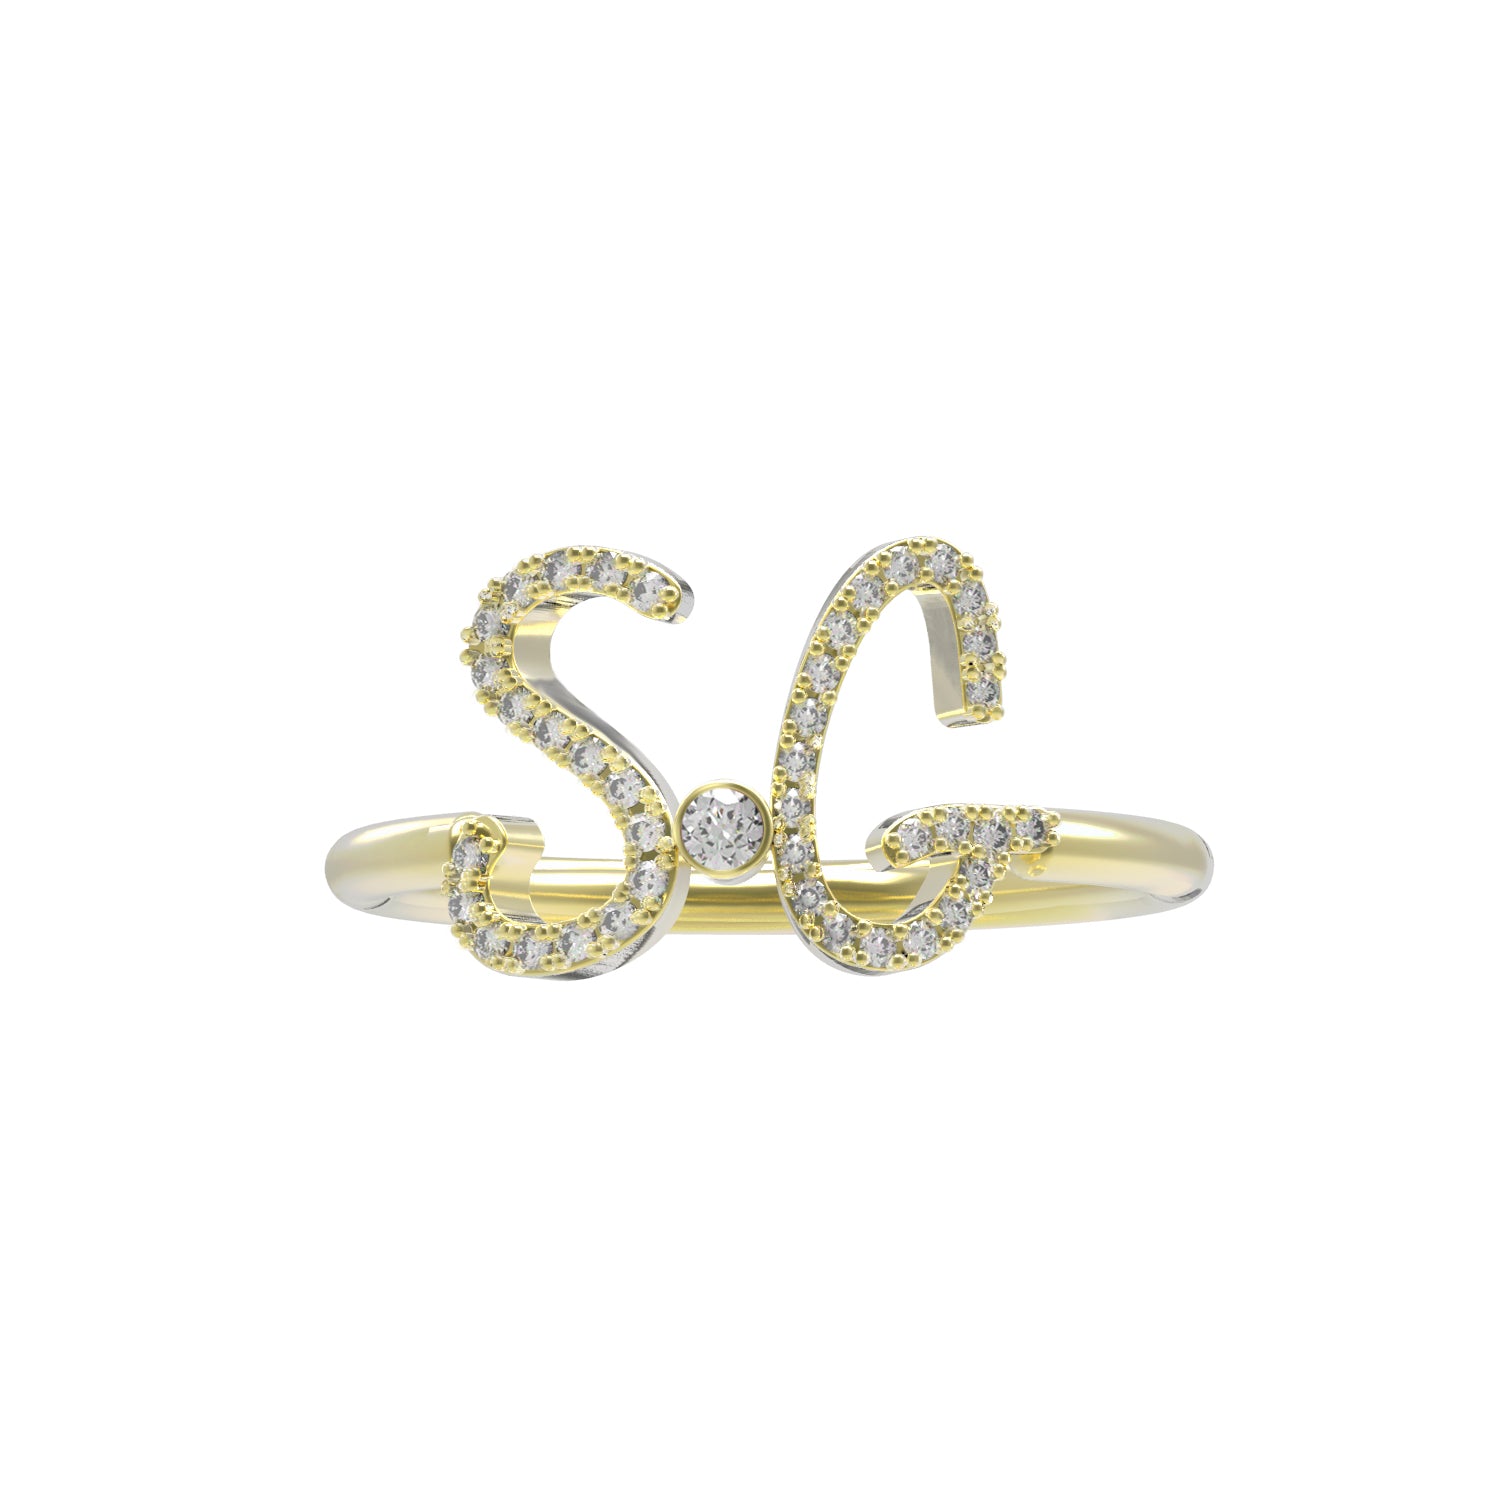 Buy Valentine gift Jewellery Stylish Heart Shape Golden Proposal i love you  Name Alphabet Letter Initial S Rings for girls women girlfriend Men Boys  Couples American diamond Crystal Silver Plated Ring Set